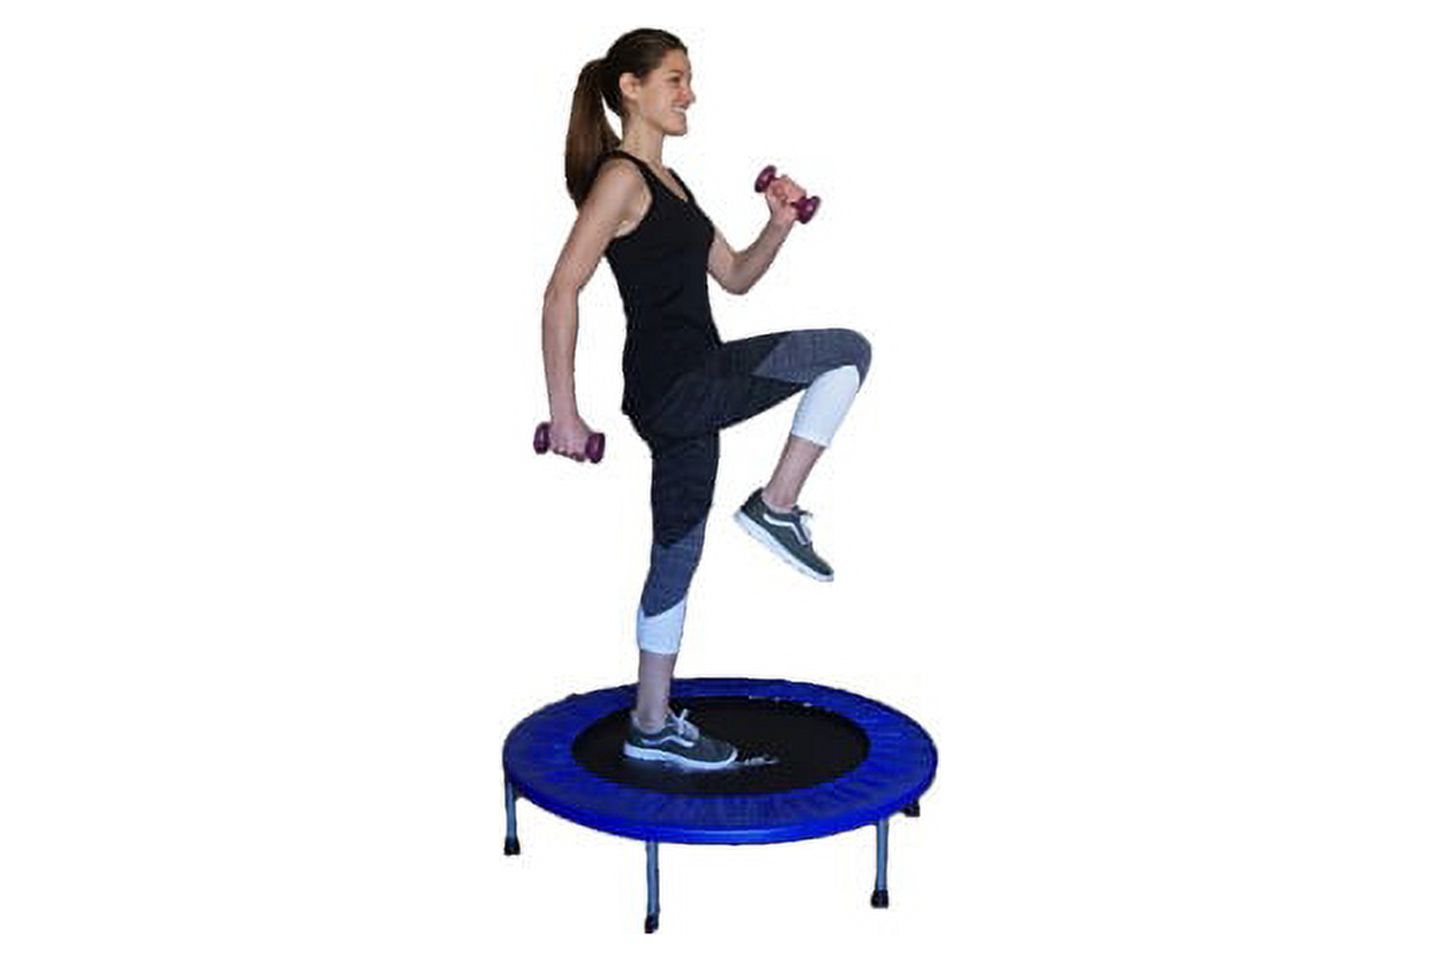 Airzone 38-Inch Fitness Trampoline, Blue - image 4 of 4